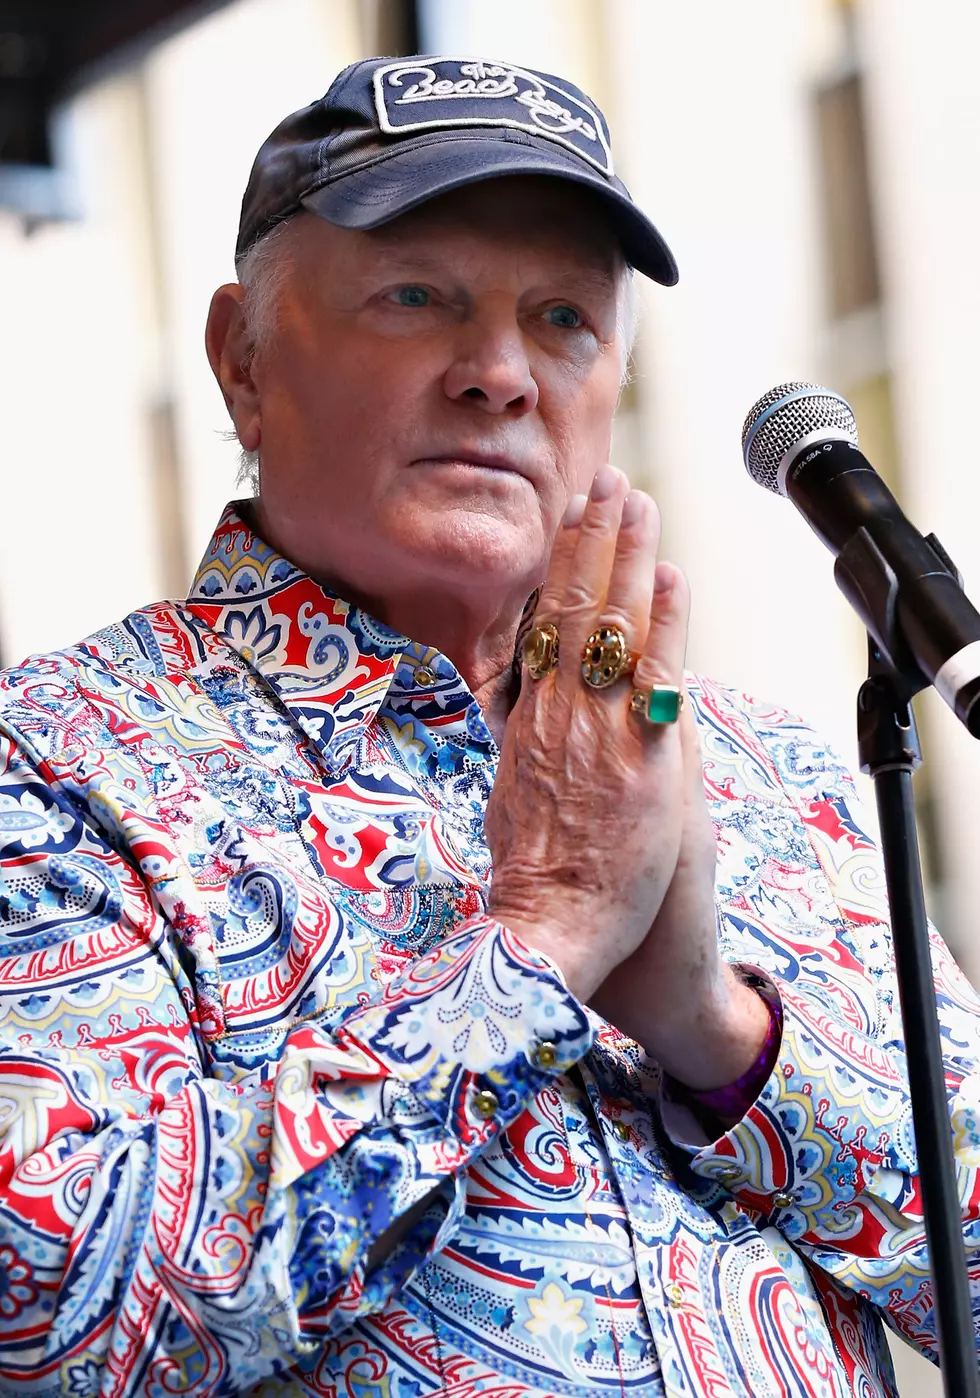 The Beach Boys’ Mike Love Talks About Performing Around the World [Interview]